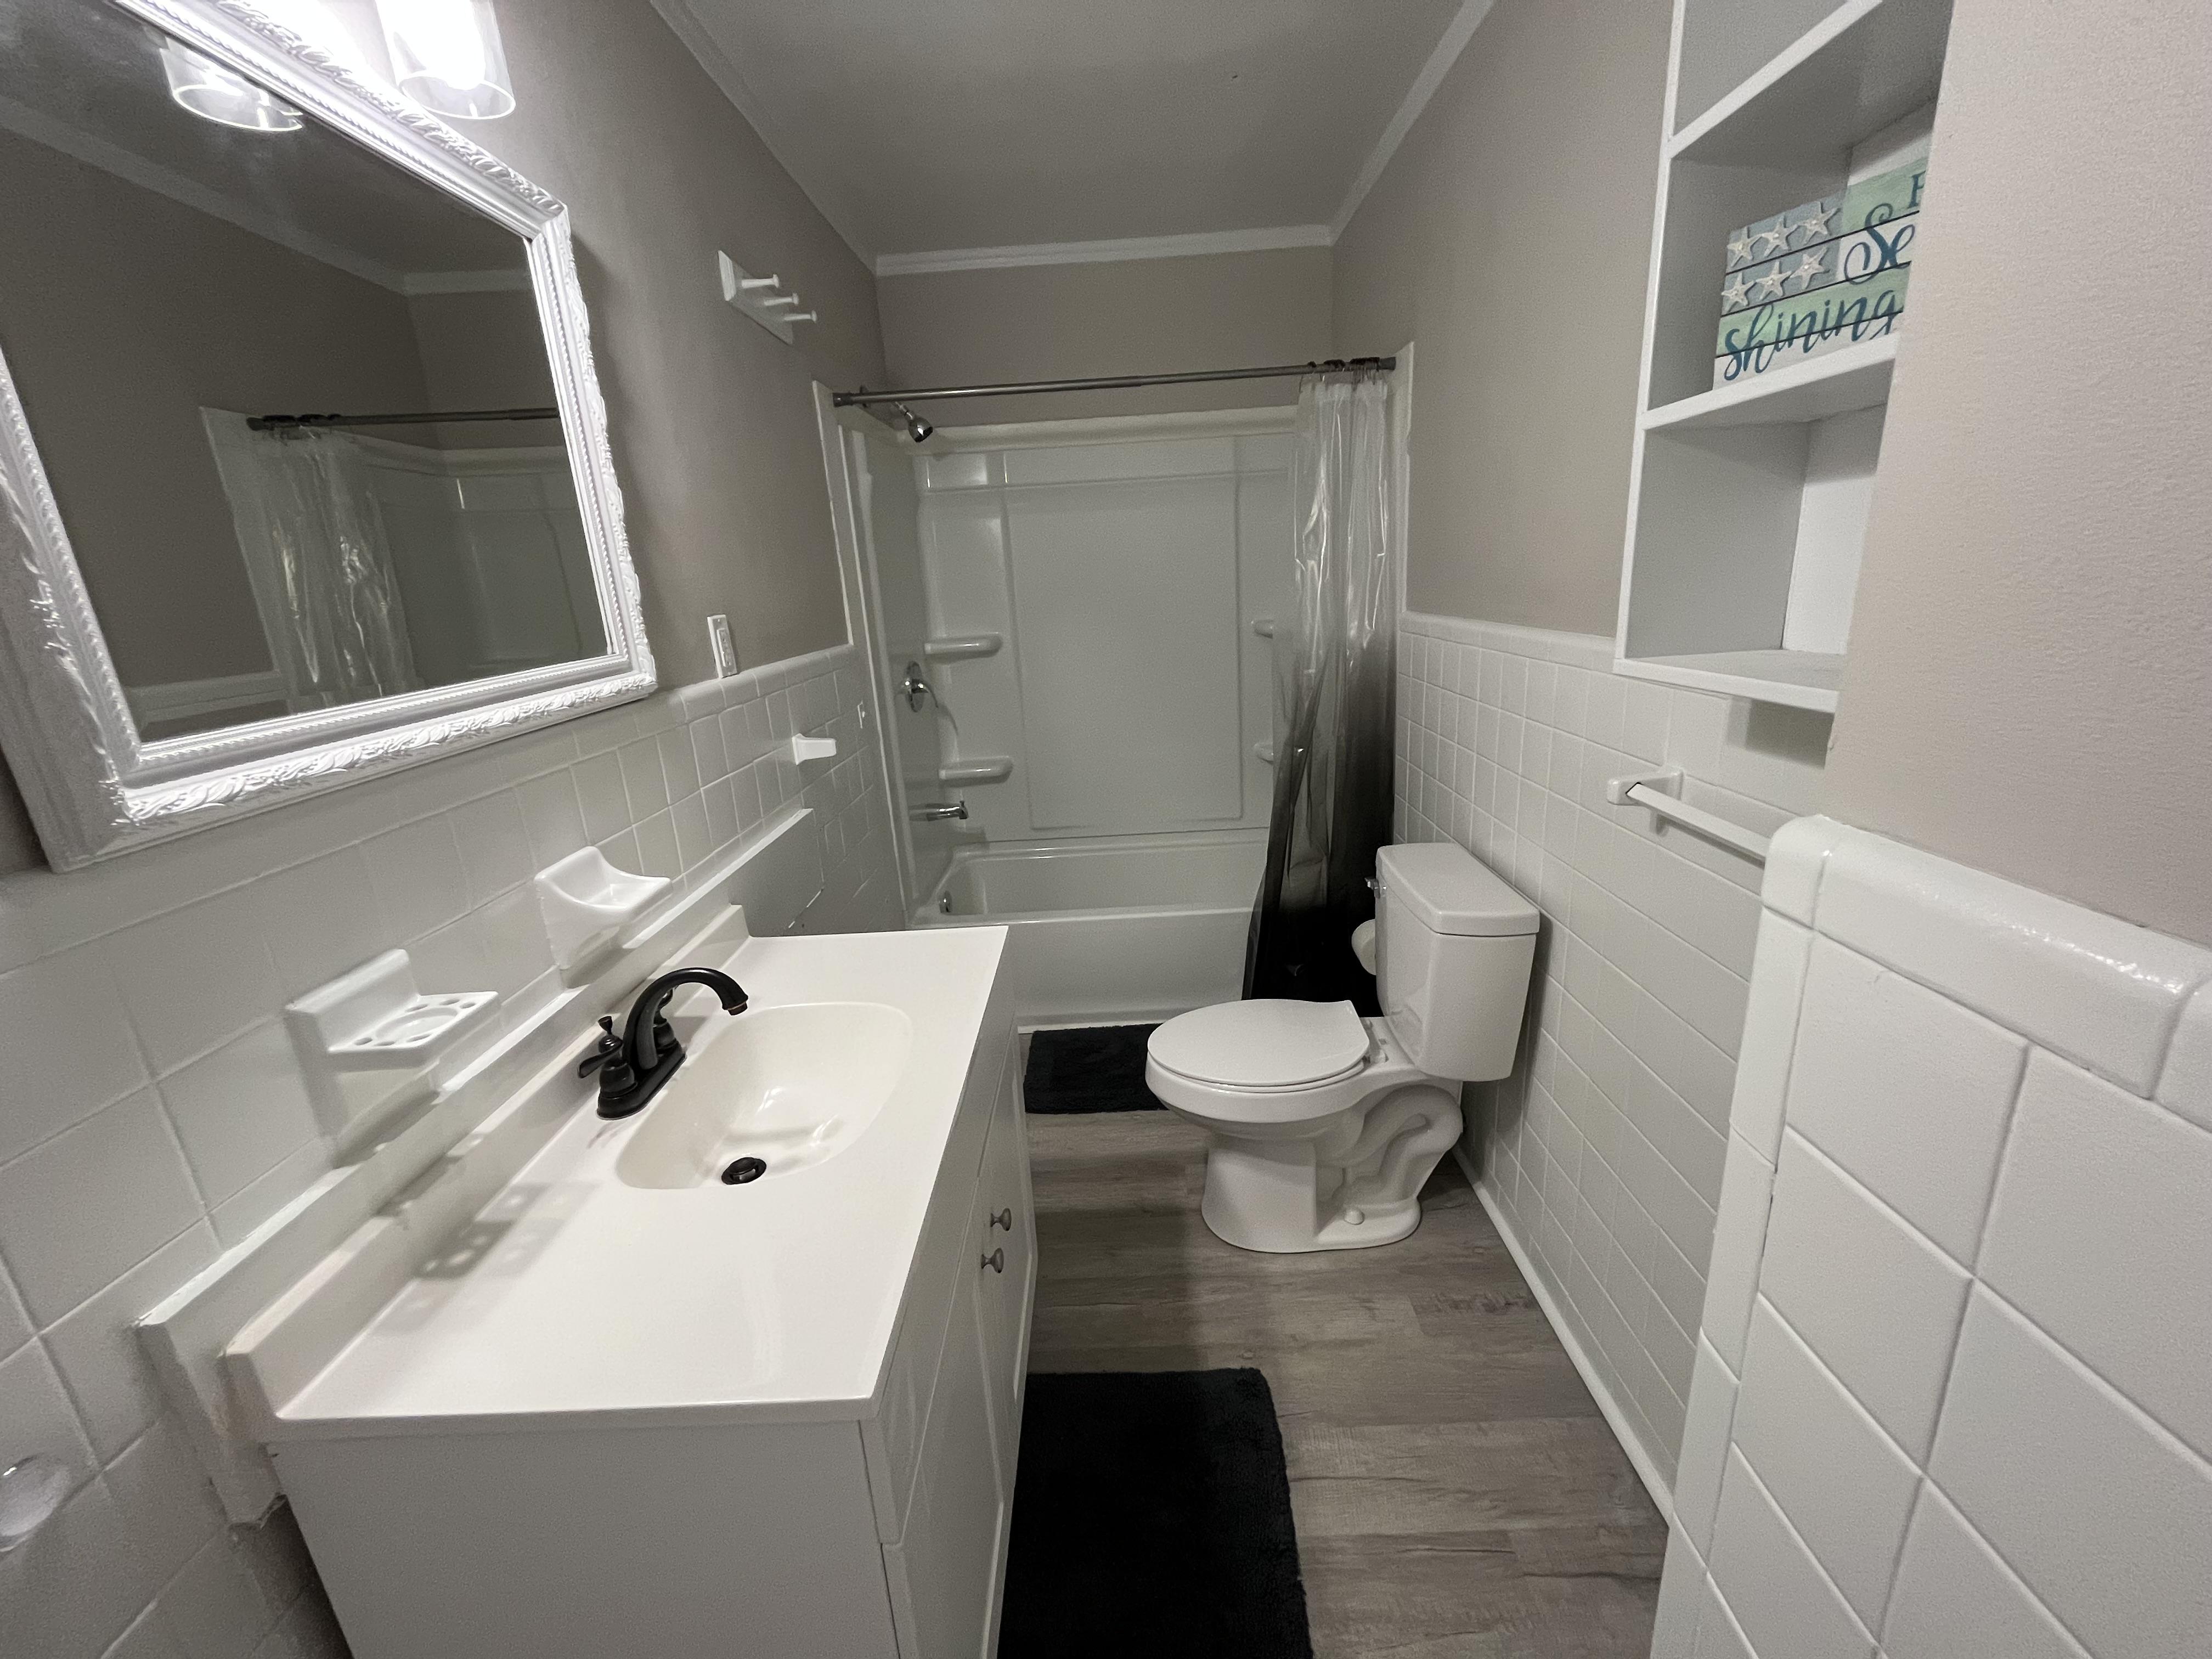 Sparkling clean bathroom with extra storage space and everything including shower is brand new!